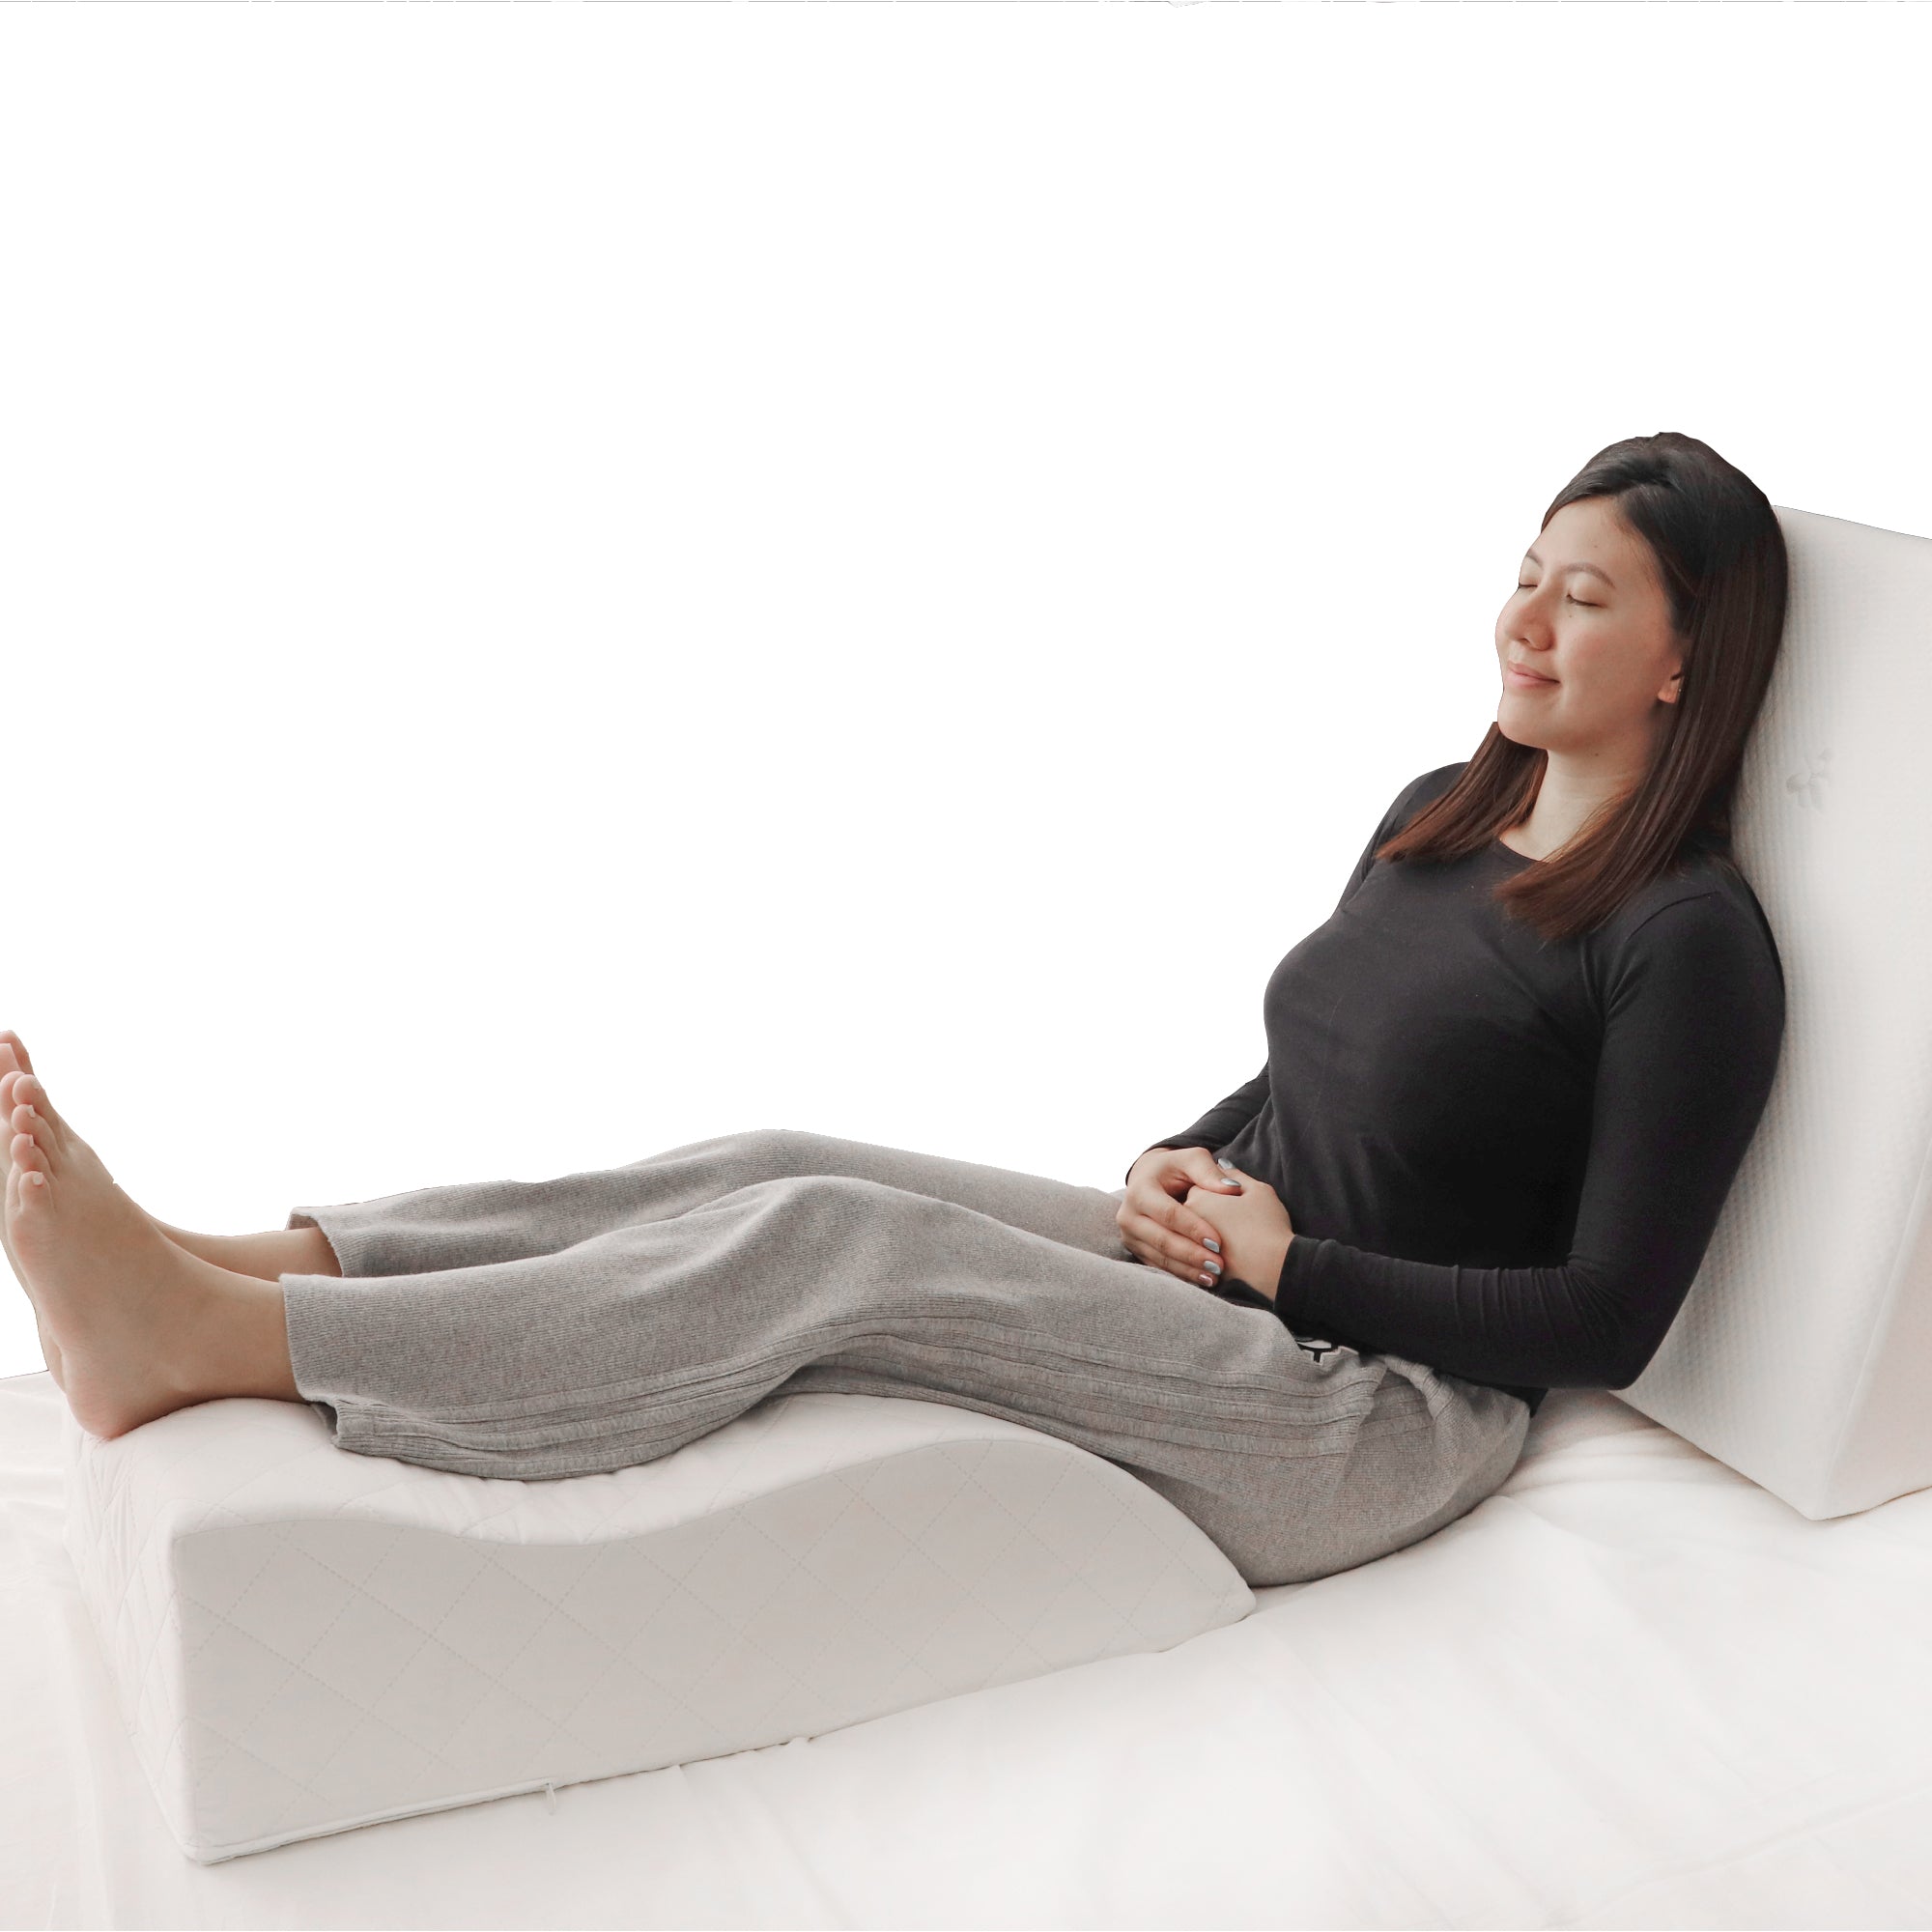 Moon - Contour Leg Elevation & Supporting Wedge Pillow